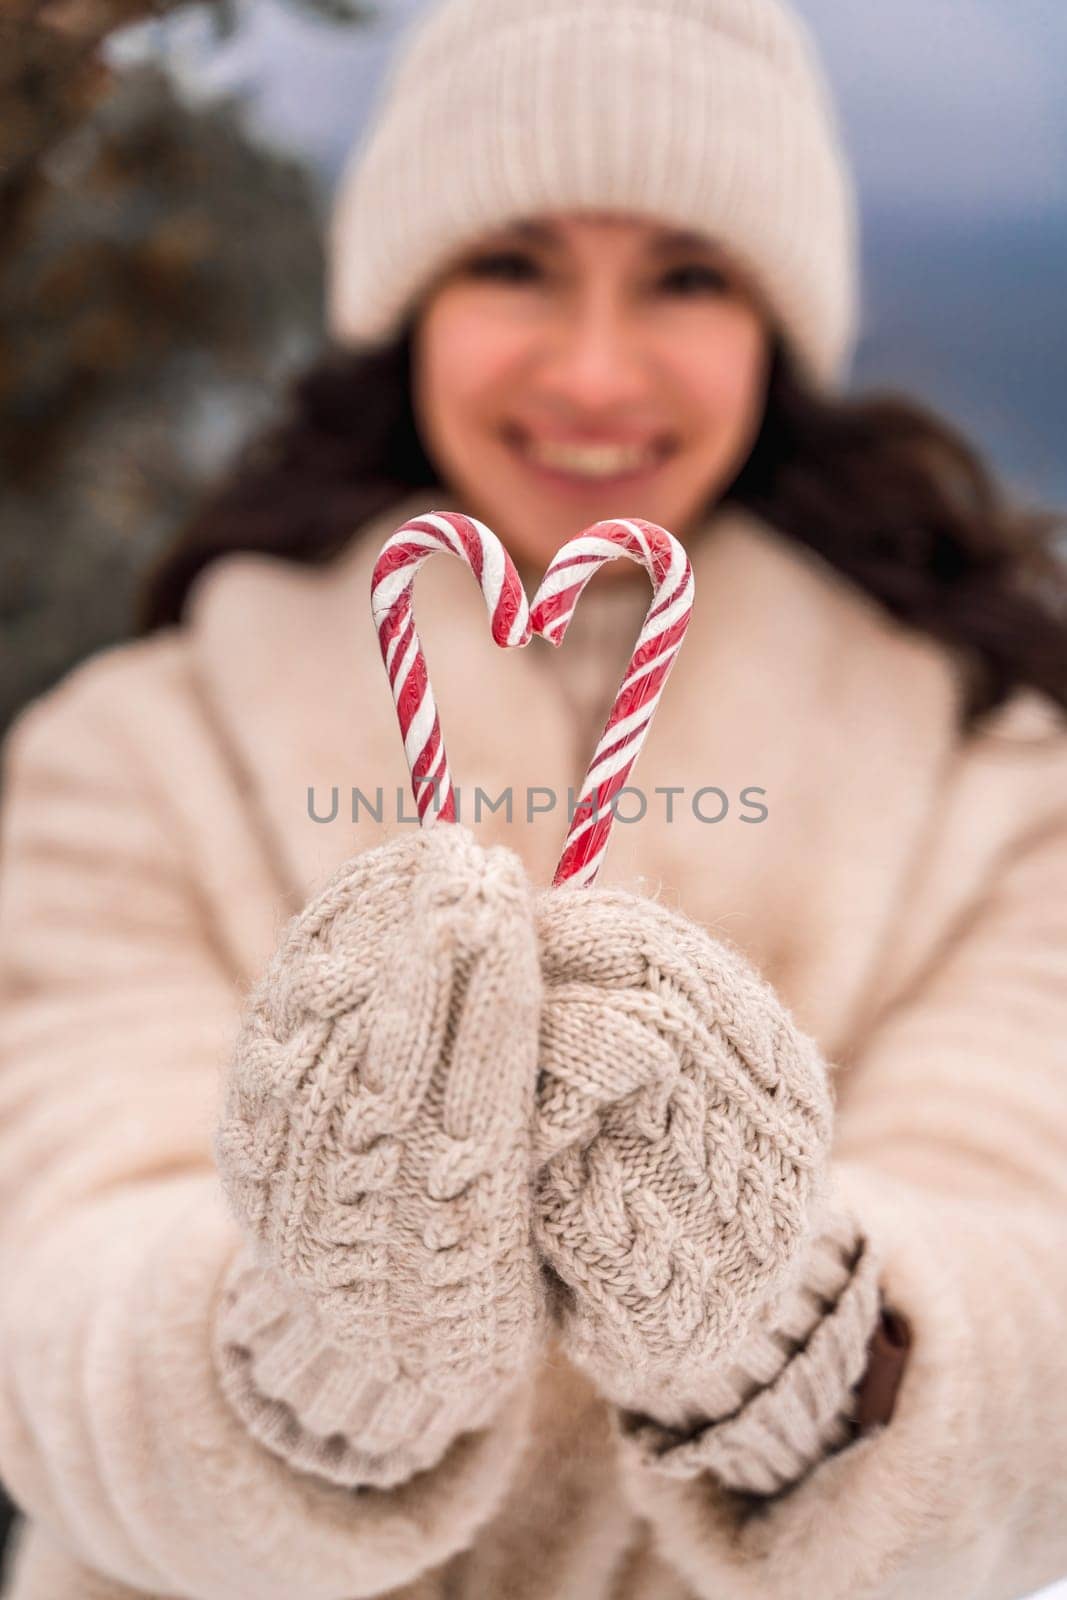 Woman candy sea. Smiling woman in knitted hat, mittens and beige coat holding lollipops candy canes in her hands in shape of heart against the backdrop of the sea. by Matiunina